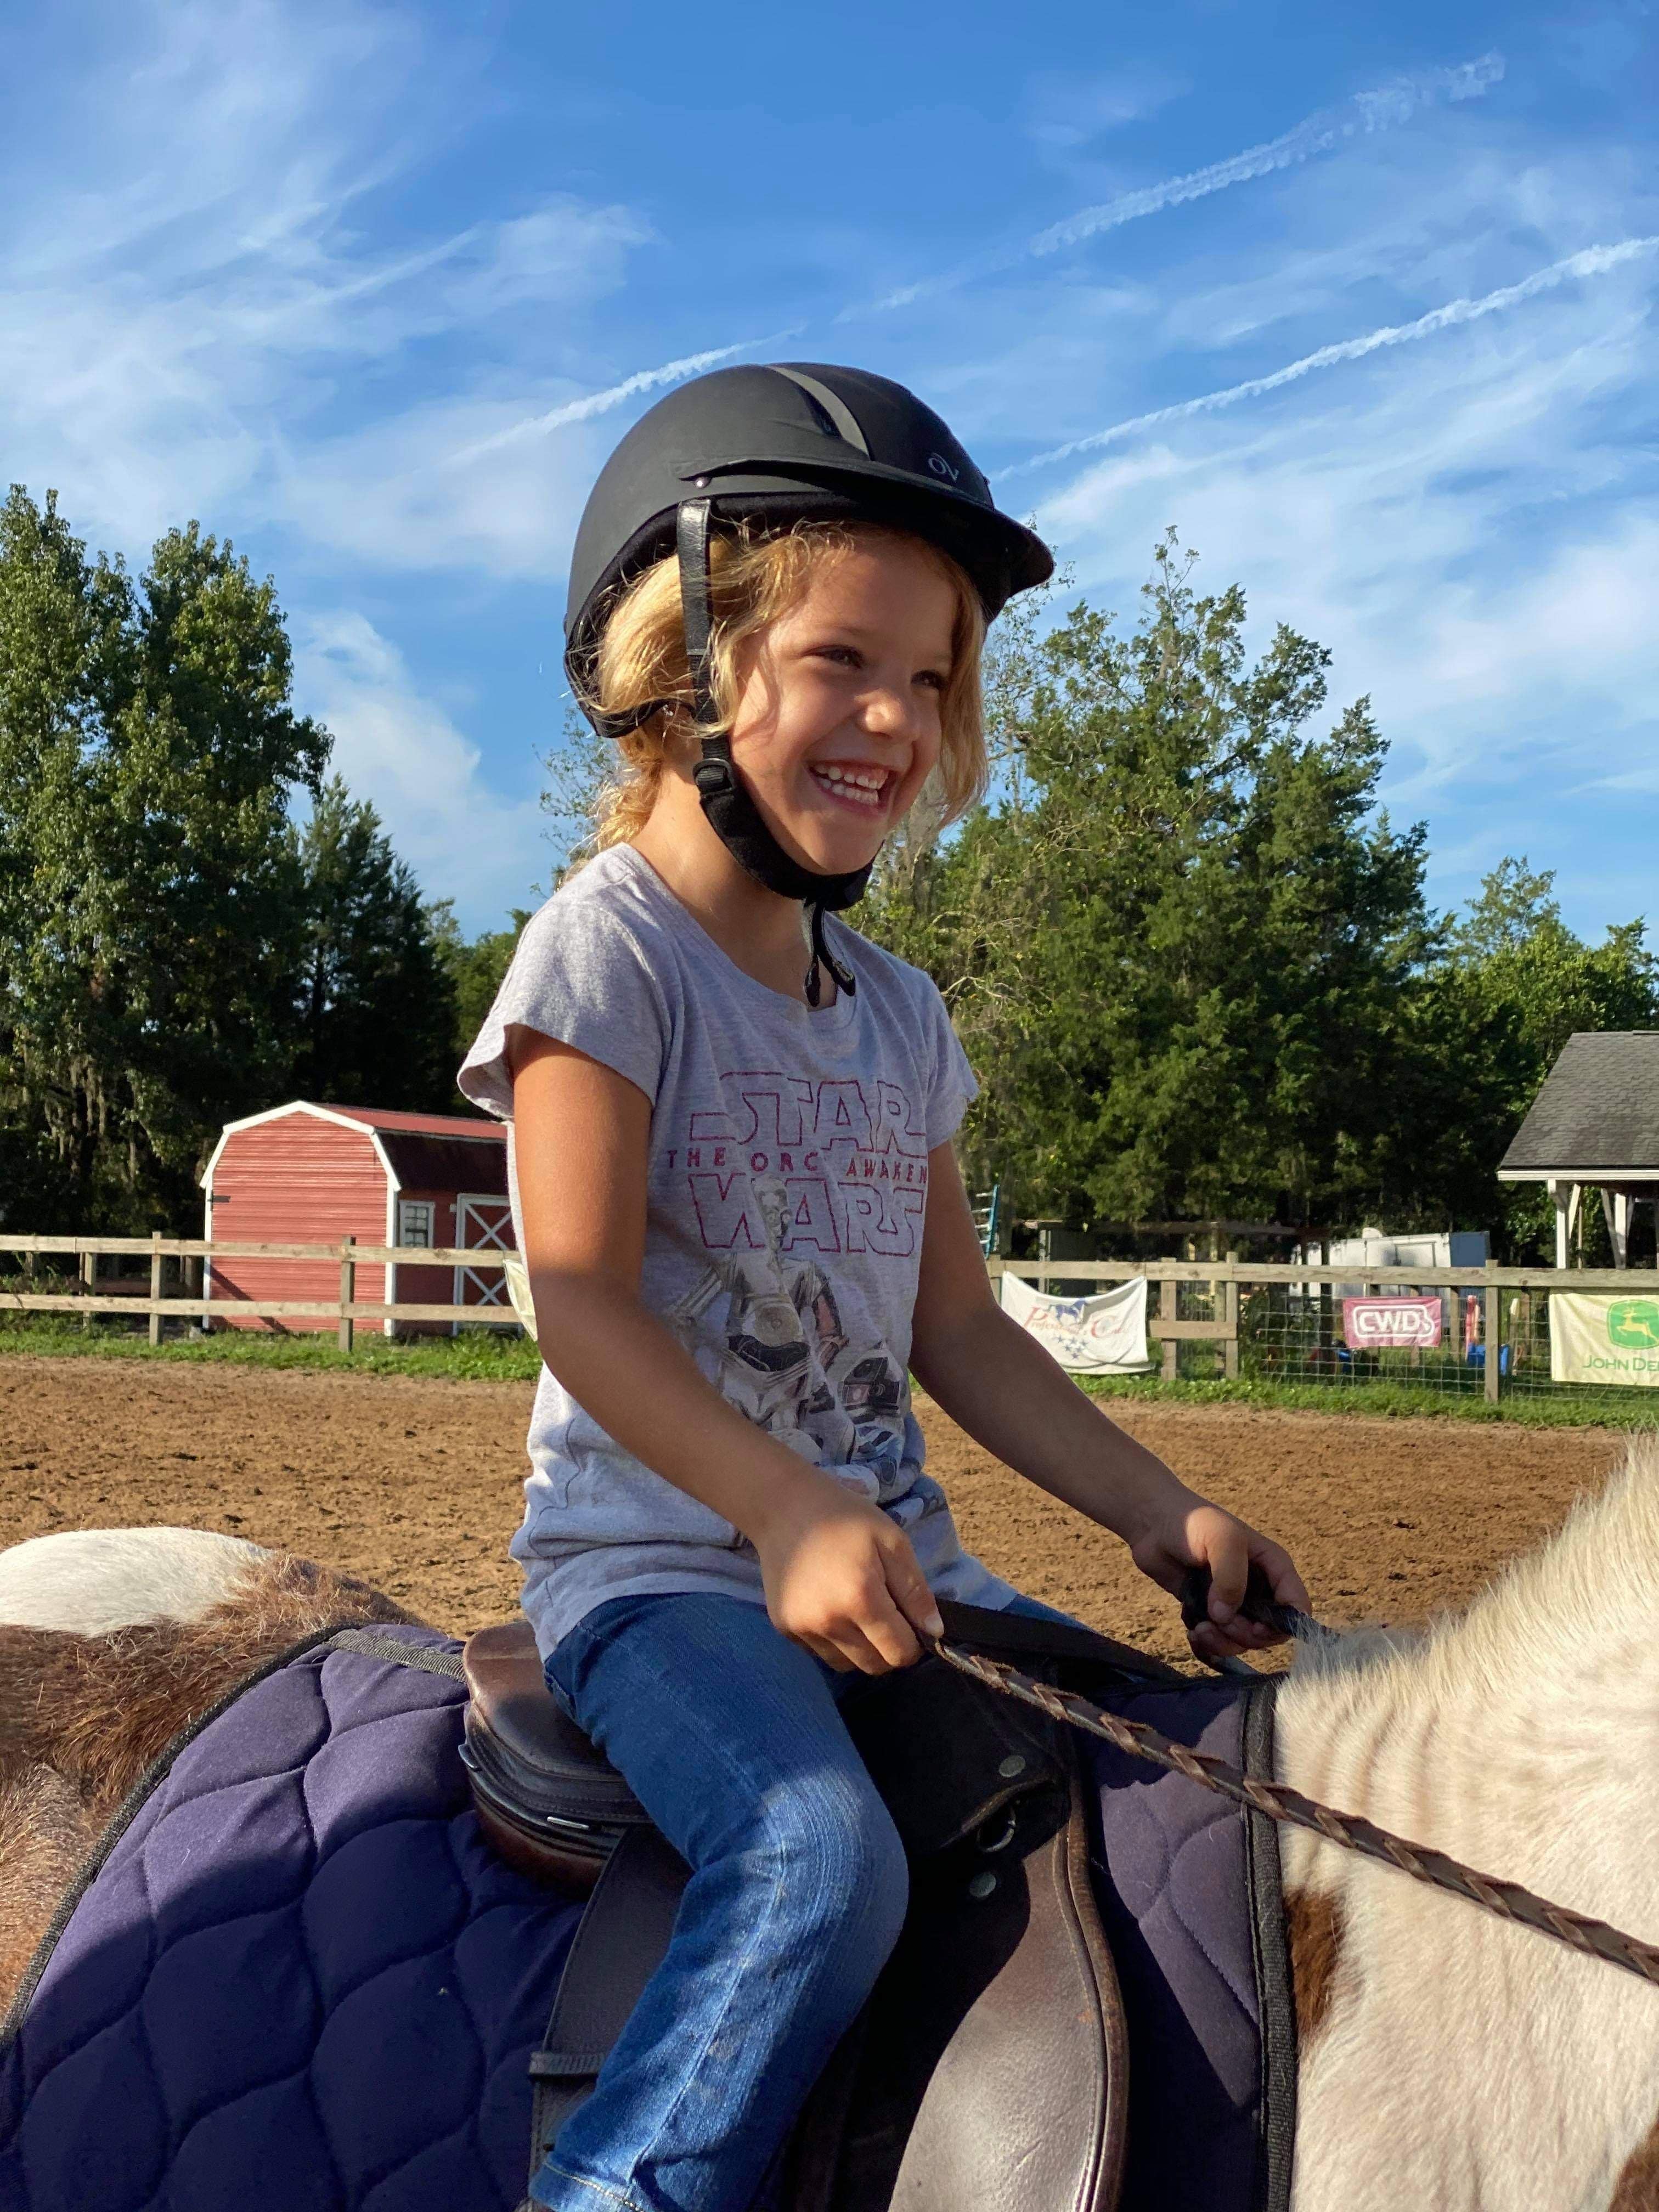 Young 4 year old student smiling on the back of a pony during lessons.